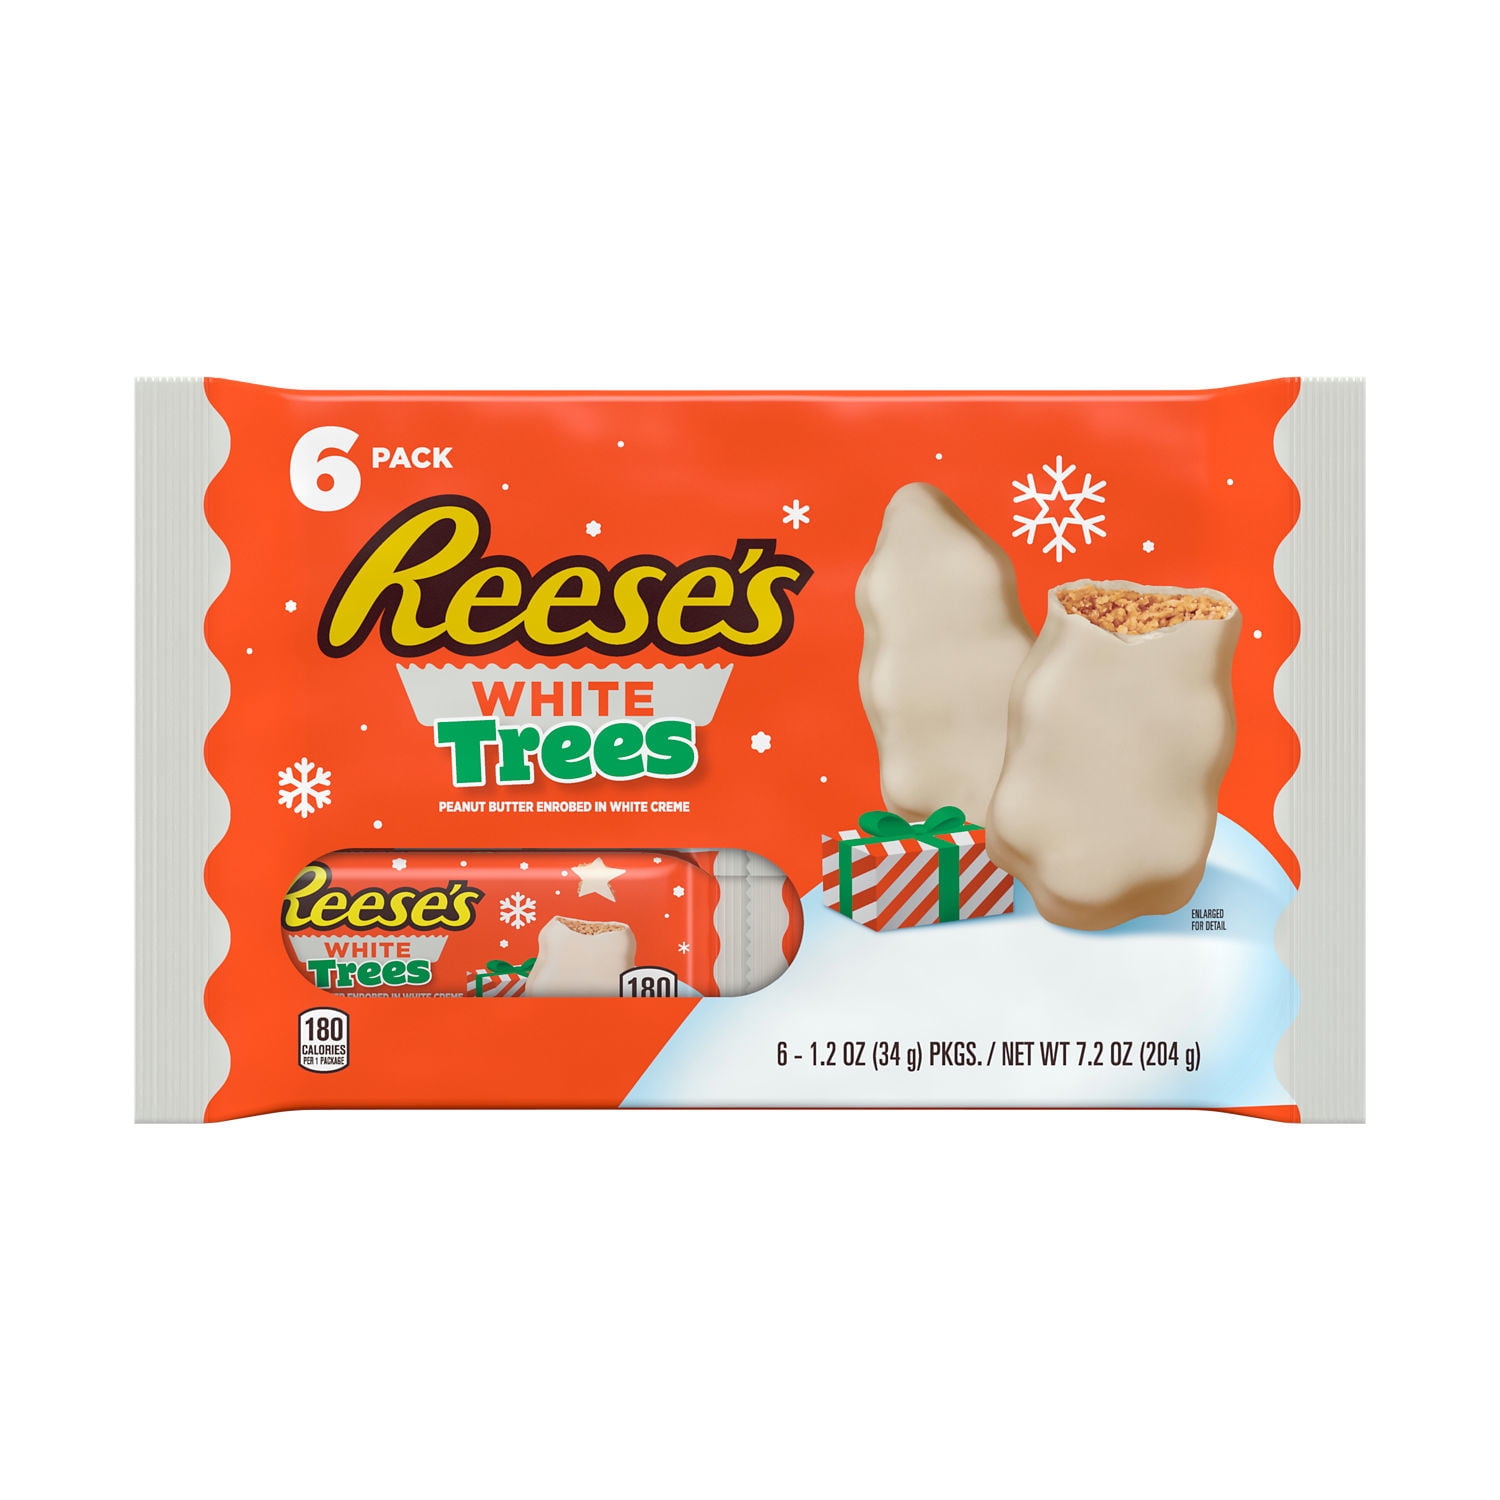 REESE'S, White Creme Peanut Butter Trees Candy, Christmas, 1.2 oz, Packs (6 Count)